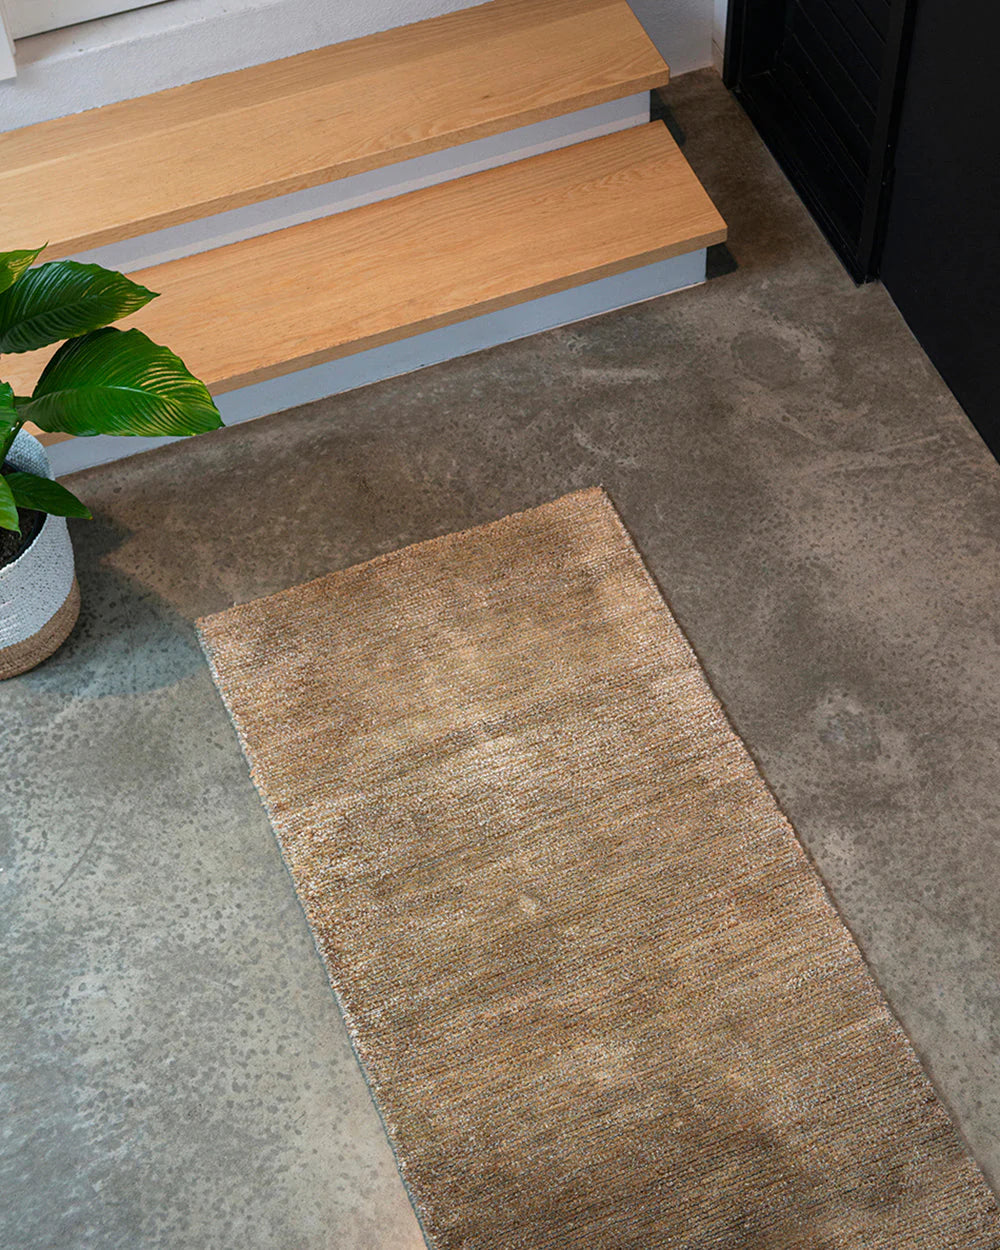 Anchorage Sand Dune Floor Runner from Baya Furtex Stockist Make Your House A Home, Furniture Store Bendigo. Free Australia Wide Delivery. Mulberi Rugs.